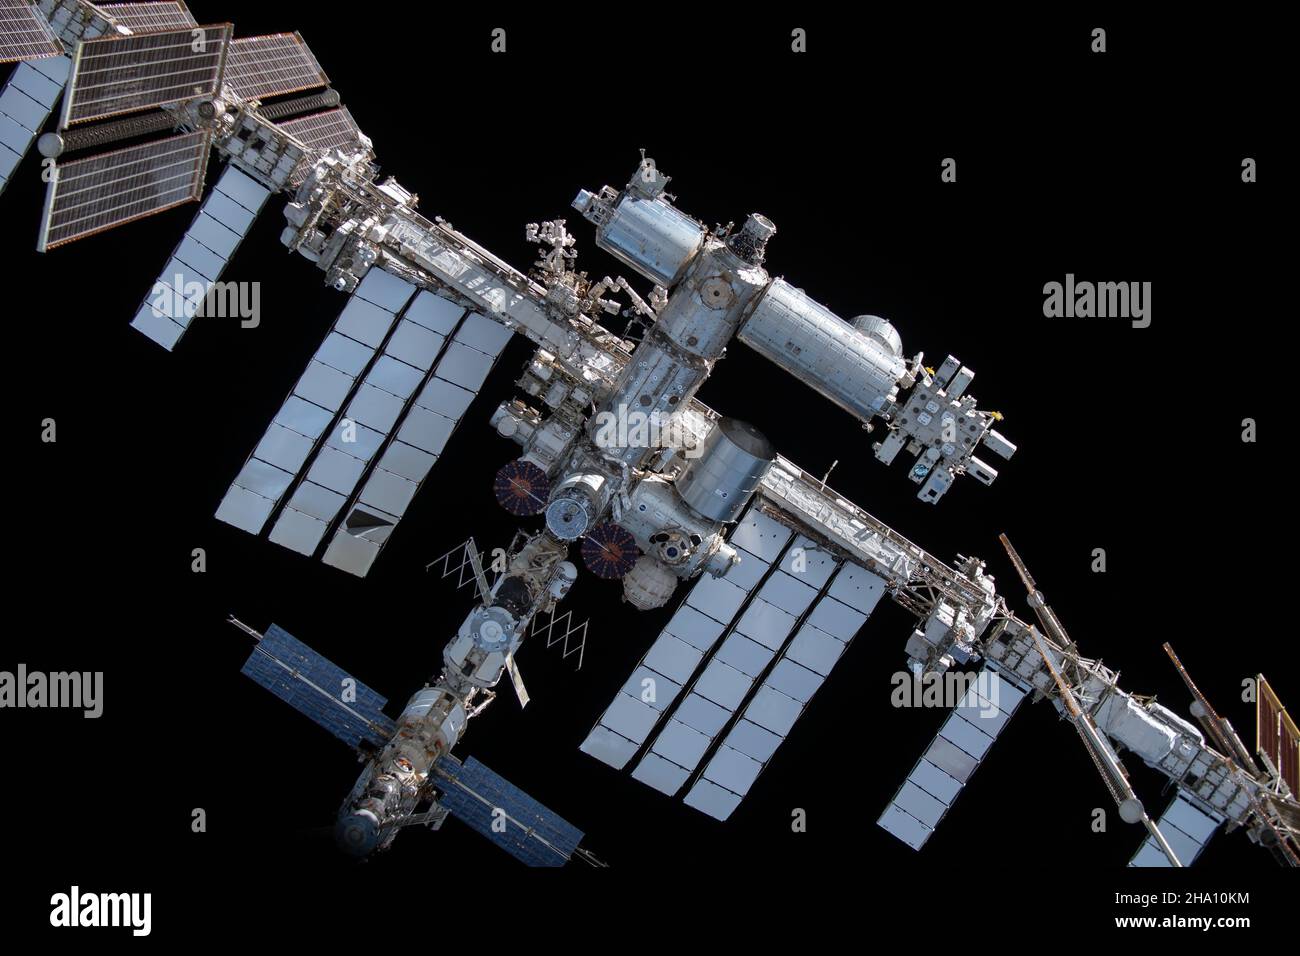 International Space Station, Earth Orbit. 08 November, 2021. The International Space Station seen from the SpaceX Crew Dragon Endeavour spacecraft during a fly-around of the orbiting lab after undocking from the Harmony module space-facing port November 8, 2021 in Earth Orbit. Credit: NASA/NASA/Alamy Live News Stock Photo